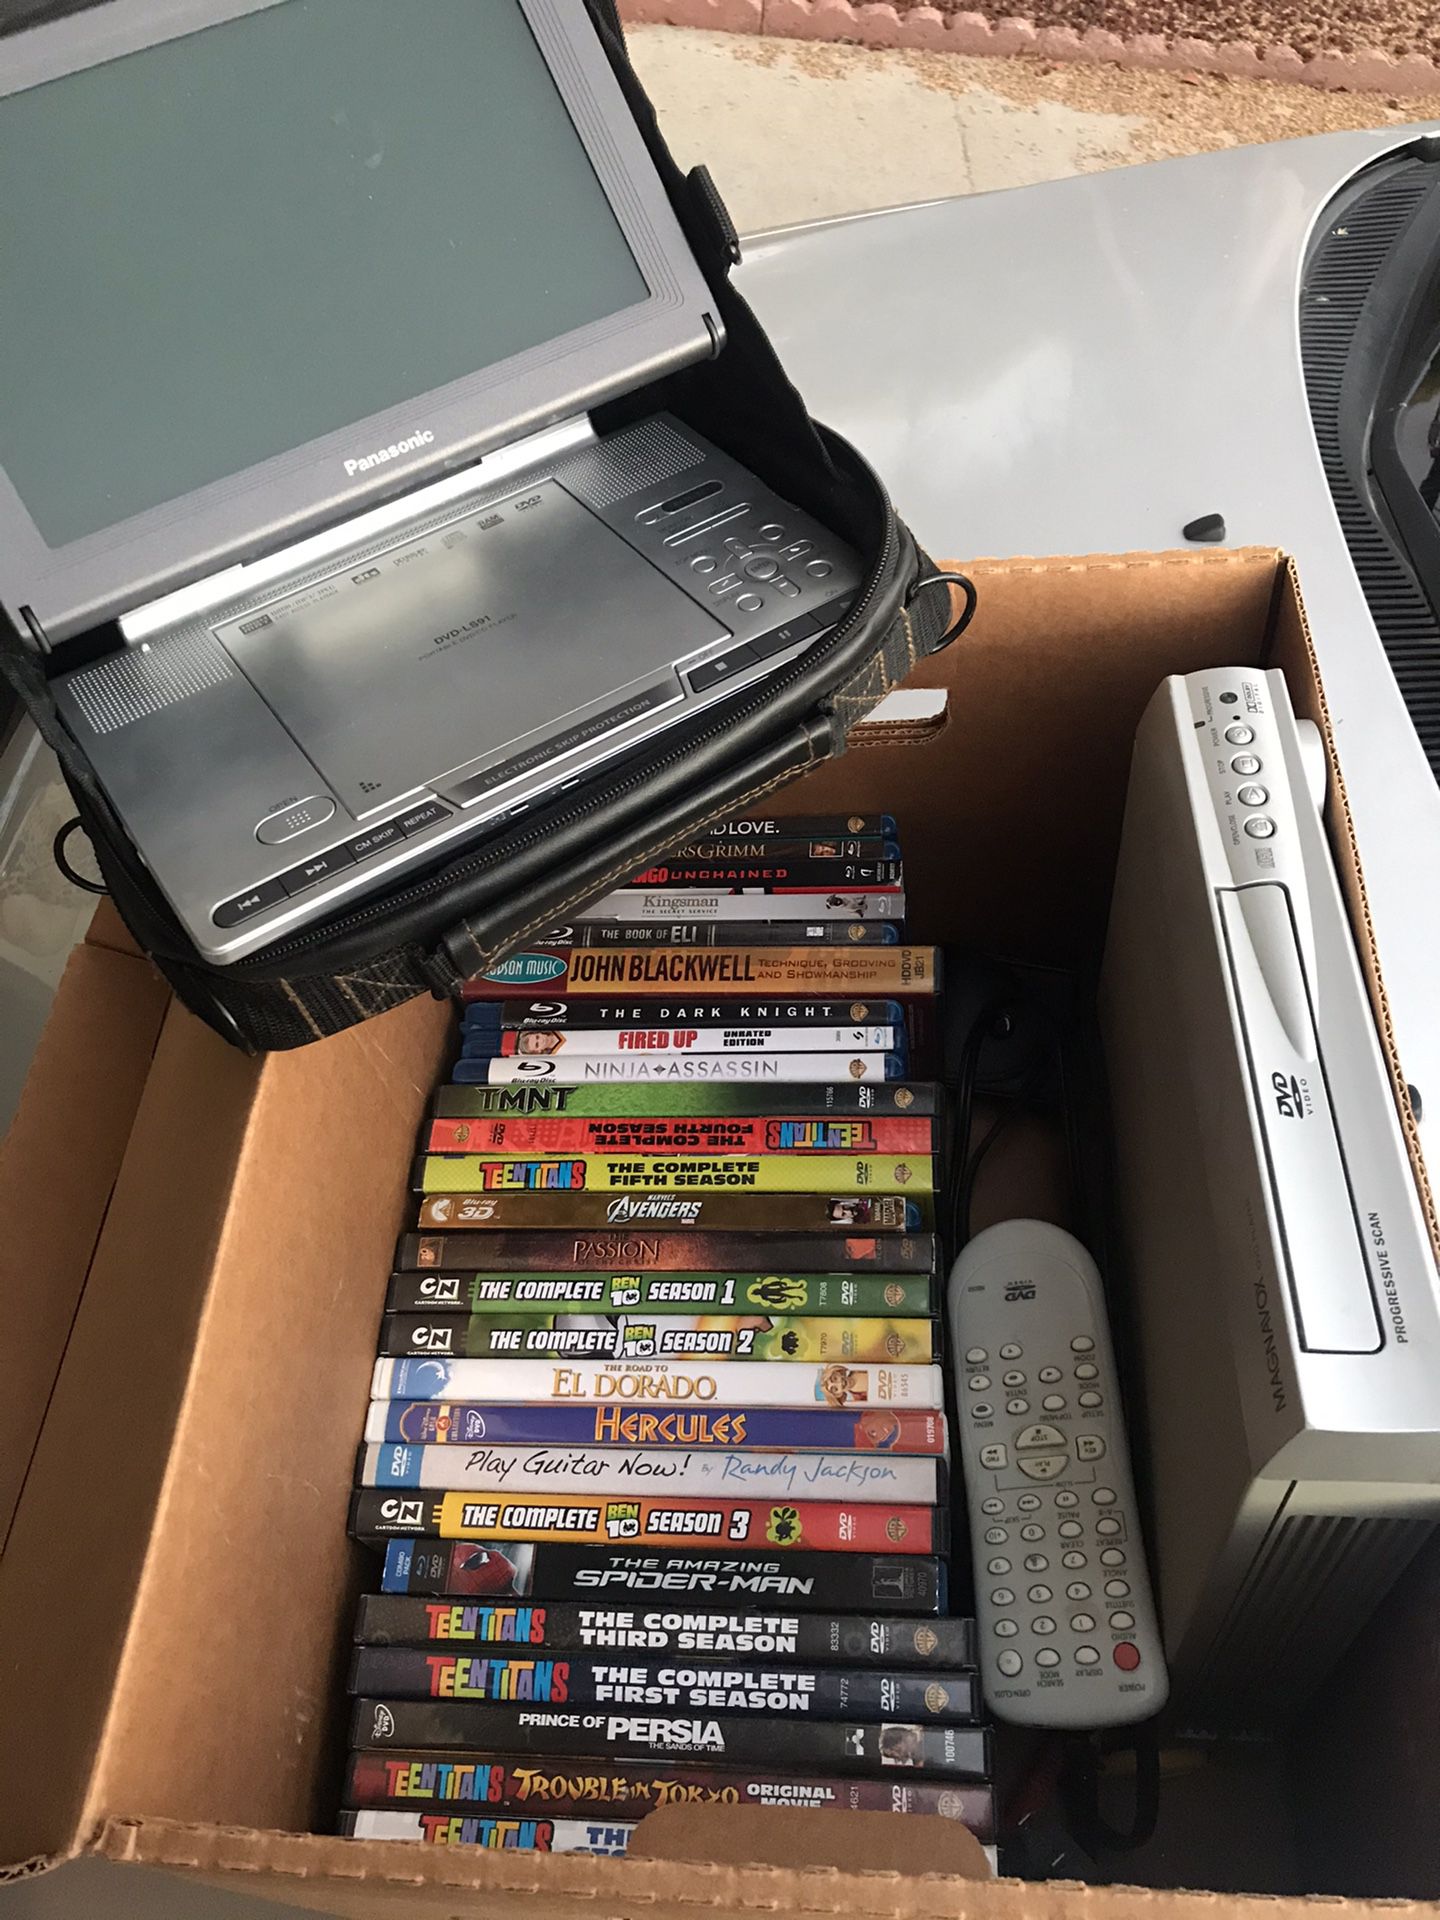 Box of DVDs & Portable player (perfect for road trips)